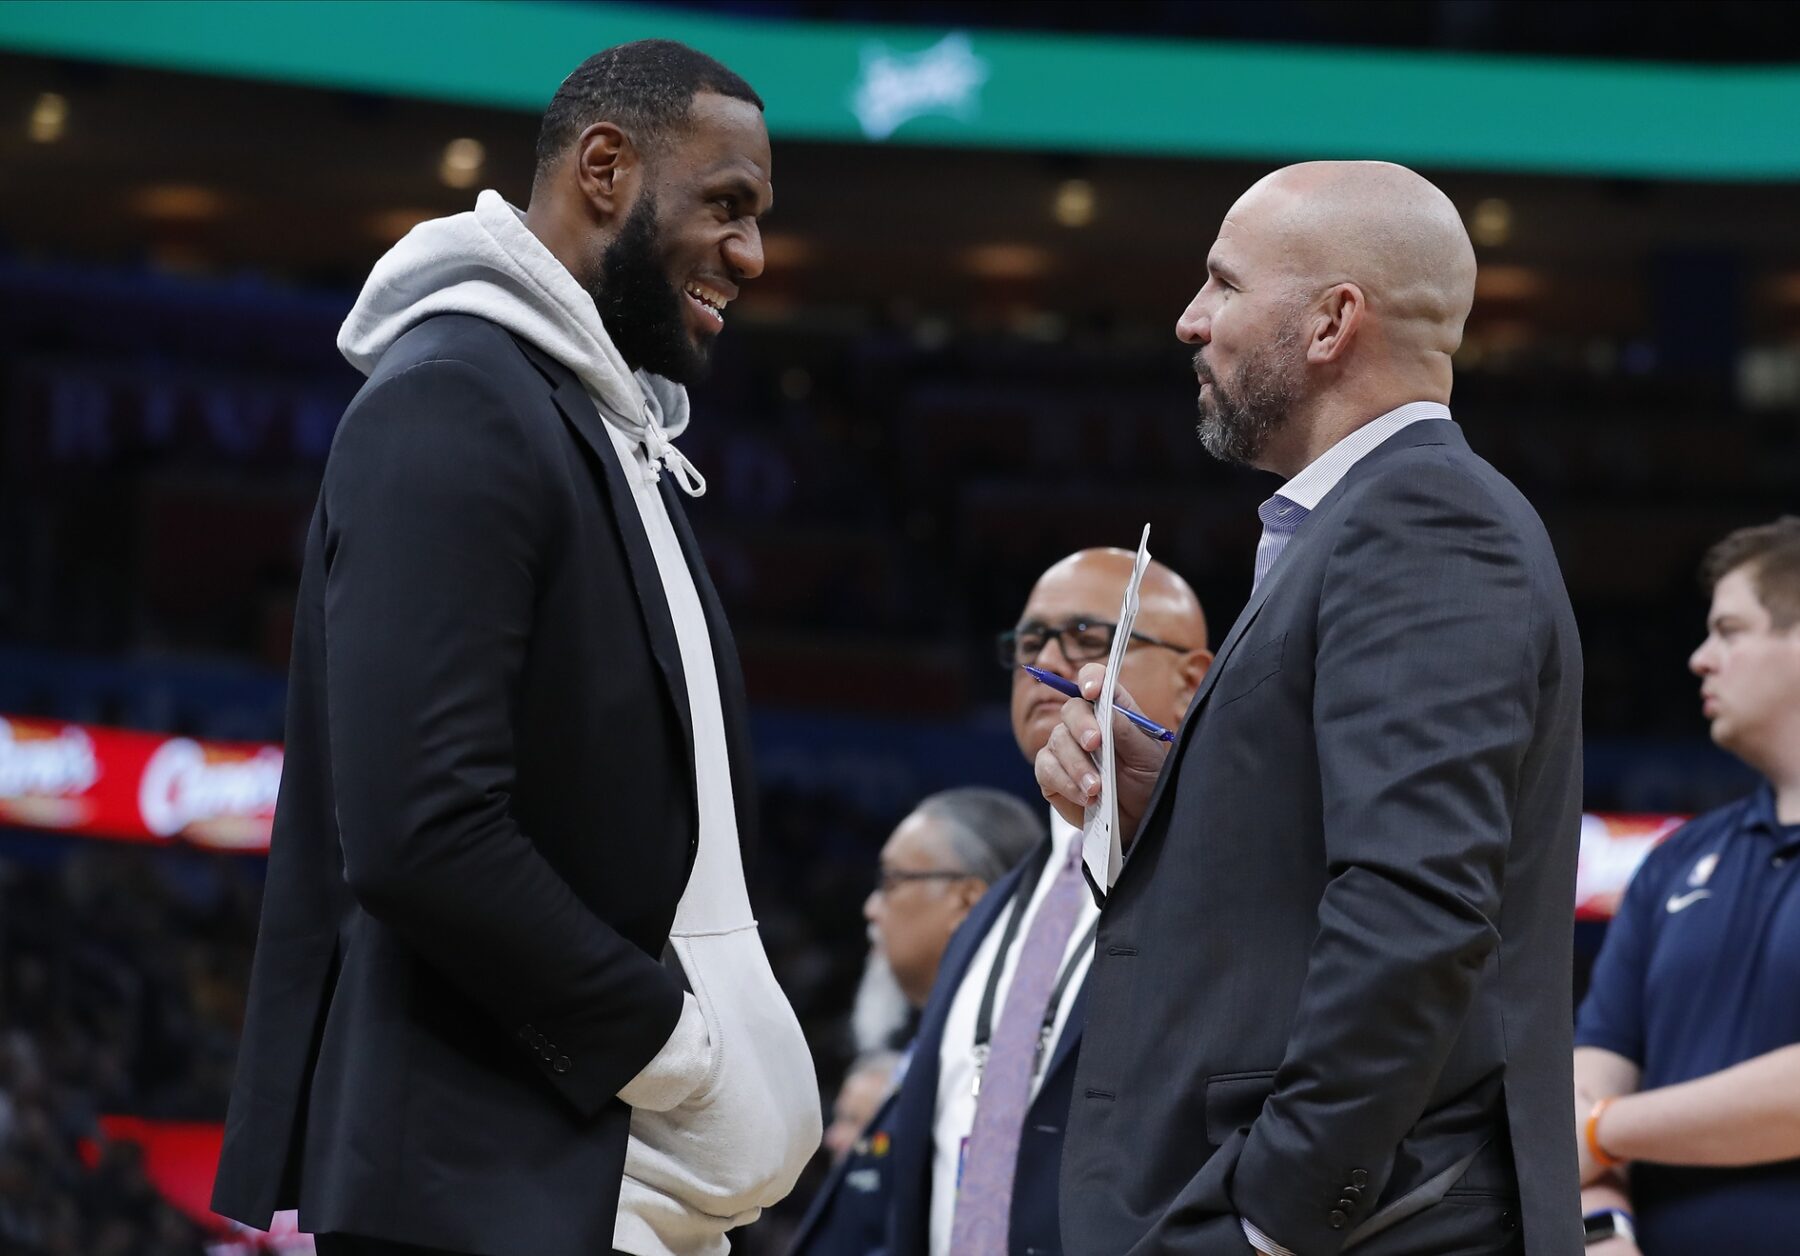 LeBron James at 38 How He's Defying Age and Impressing NBA Legends Like Jason Kidd